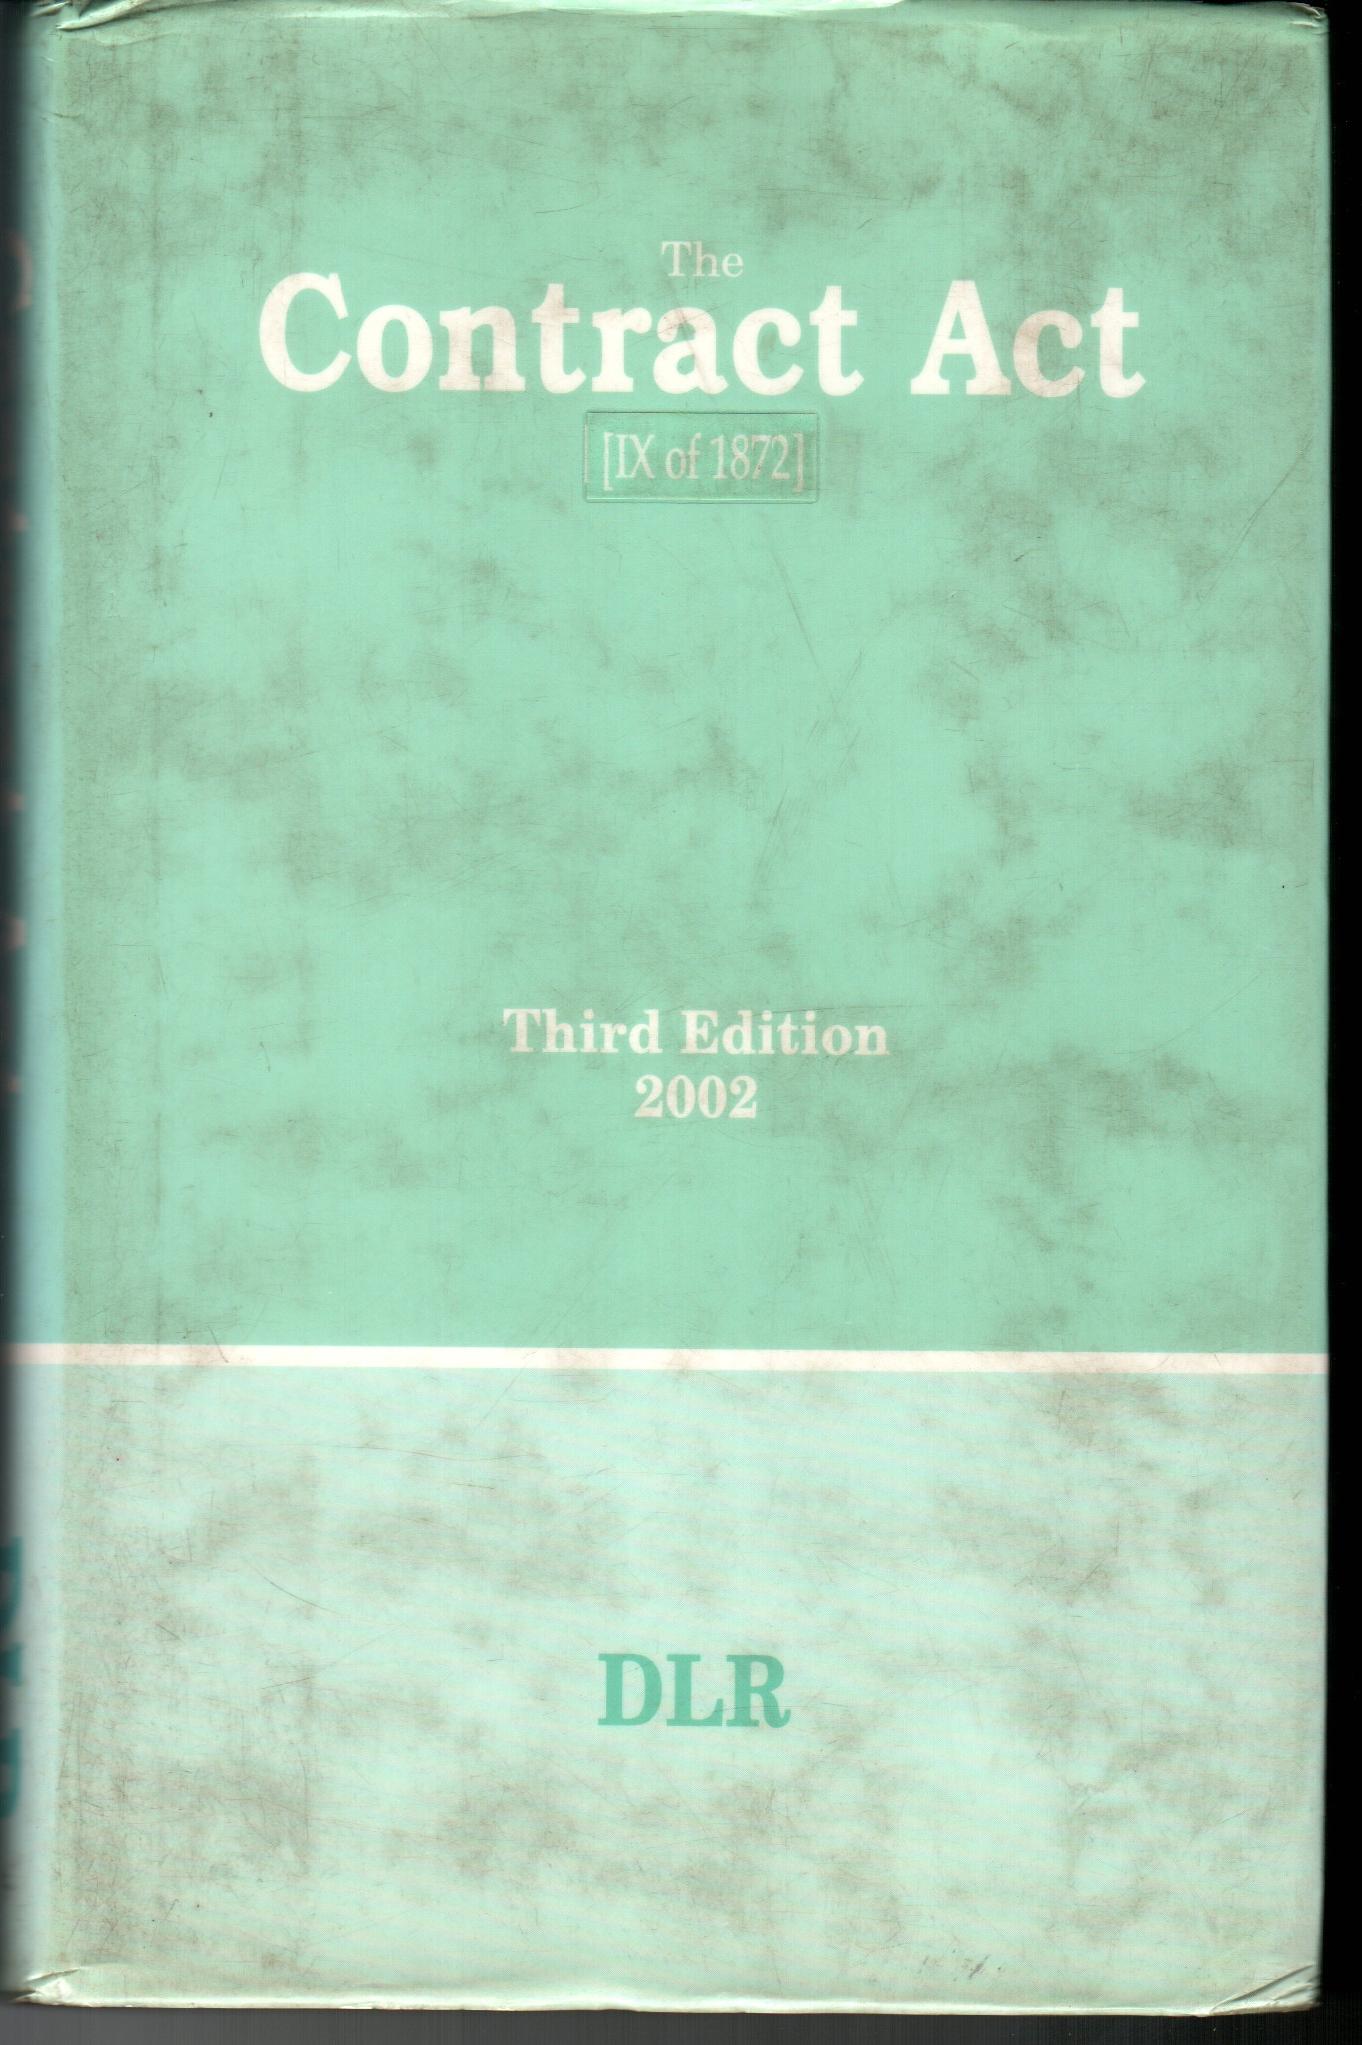 The Contract Act, DLR